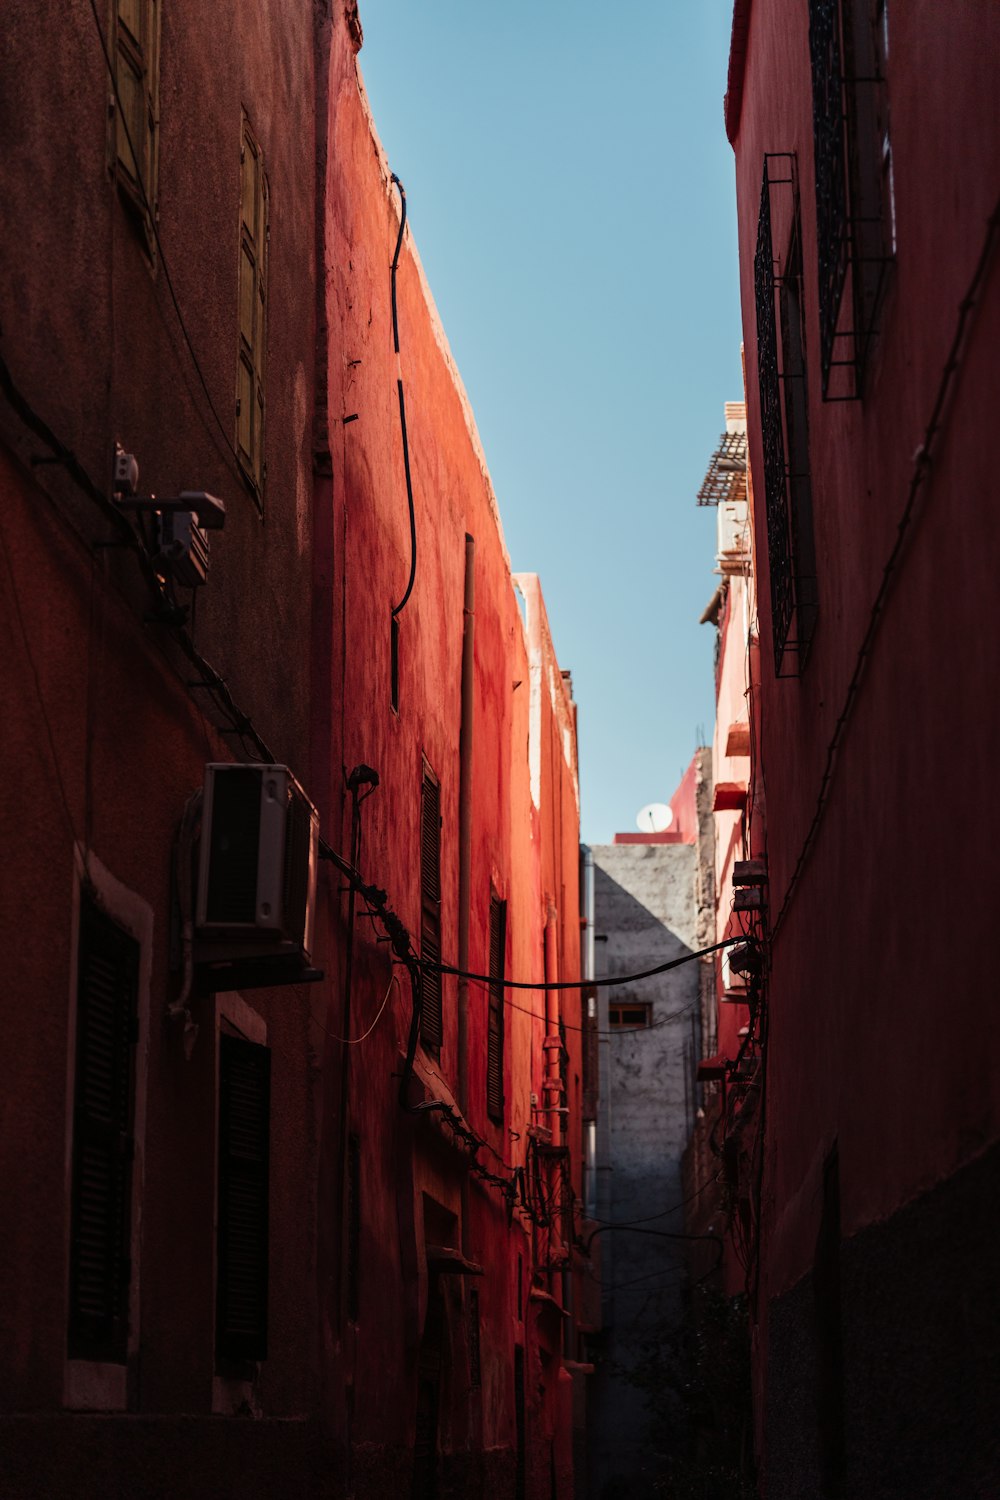 a narrow alley way with red buildings and a blue sky